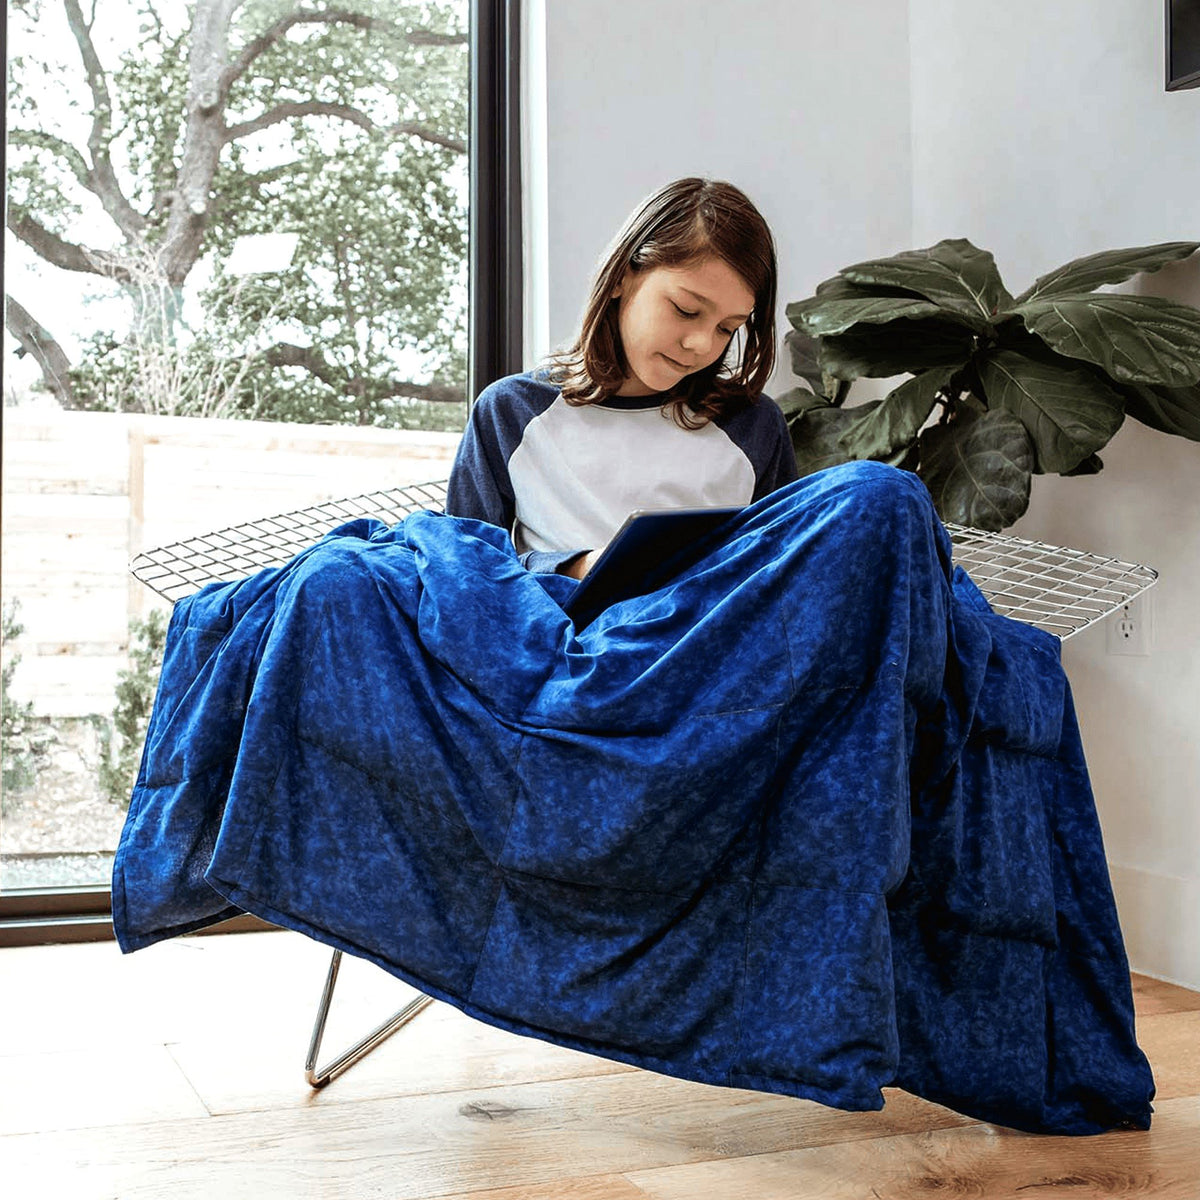 Child Reading And Sitting Under her blue Weighted Blanket